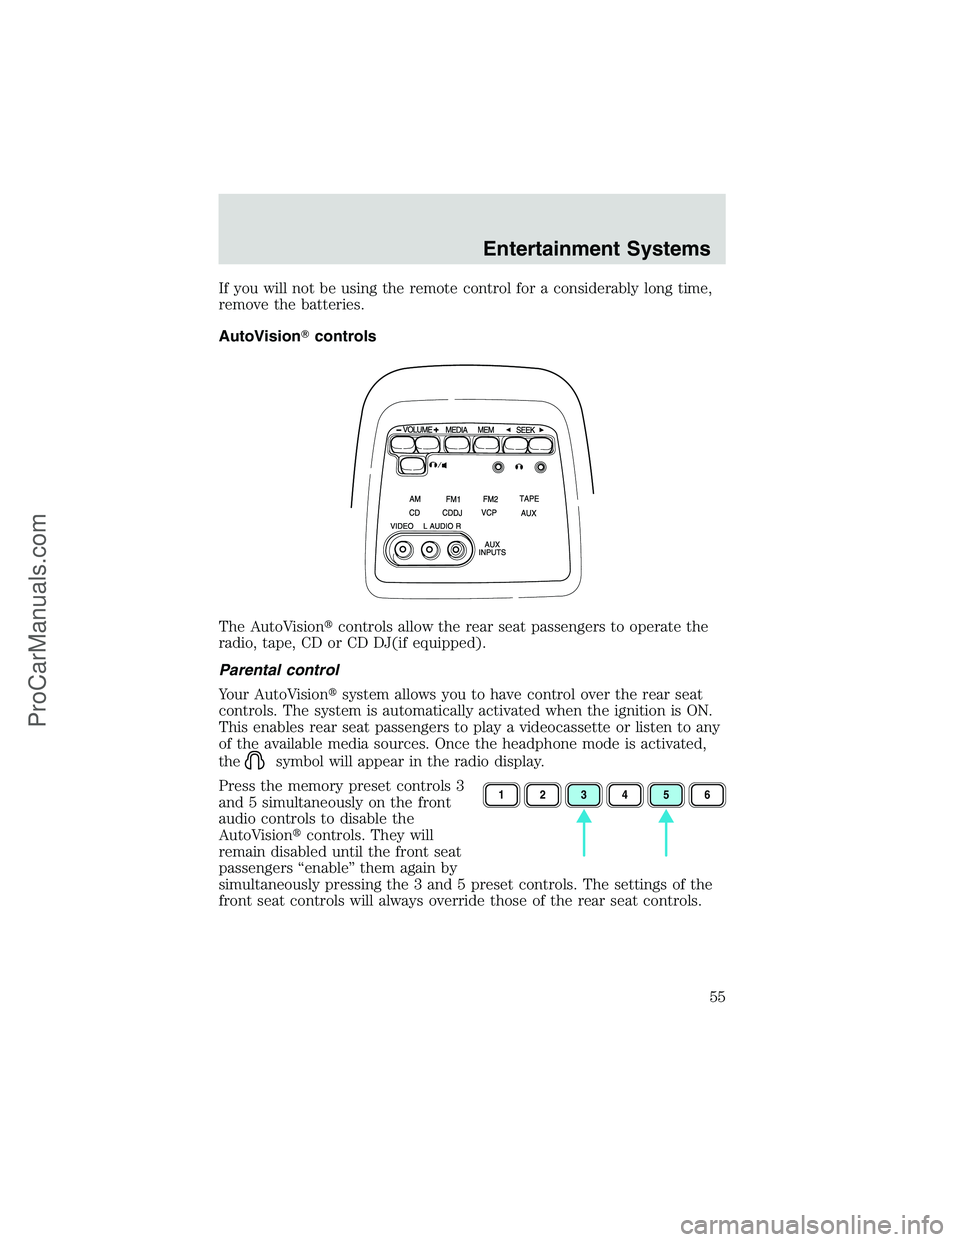 FORD E-450 2002 User Guide If you will not be using the remote control for a considerably long time,
remove the batteries.
AutoVisioncontrols
The AutoVisioncontrols allow the rear seat passengers to operate the
radio, tape, C